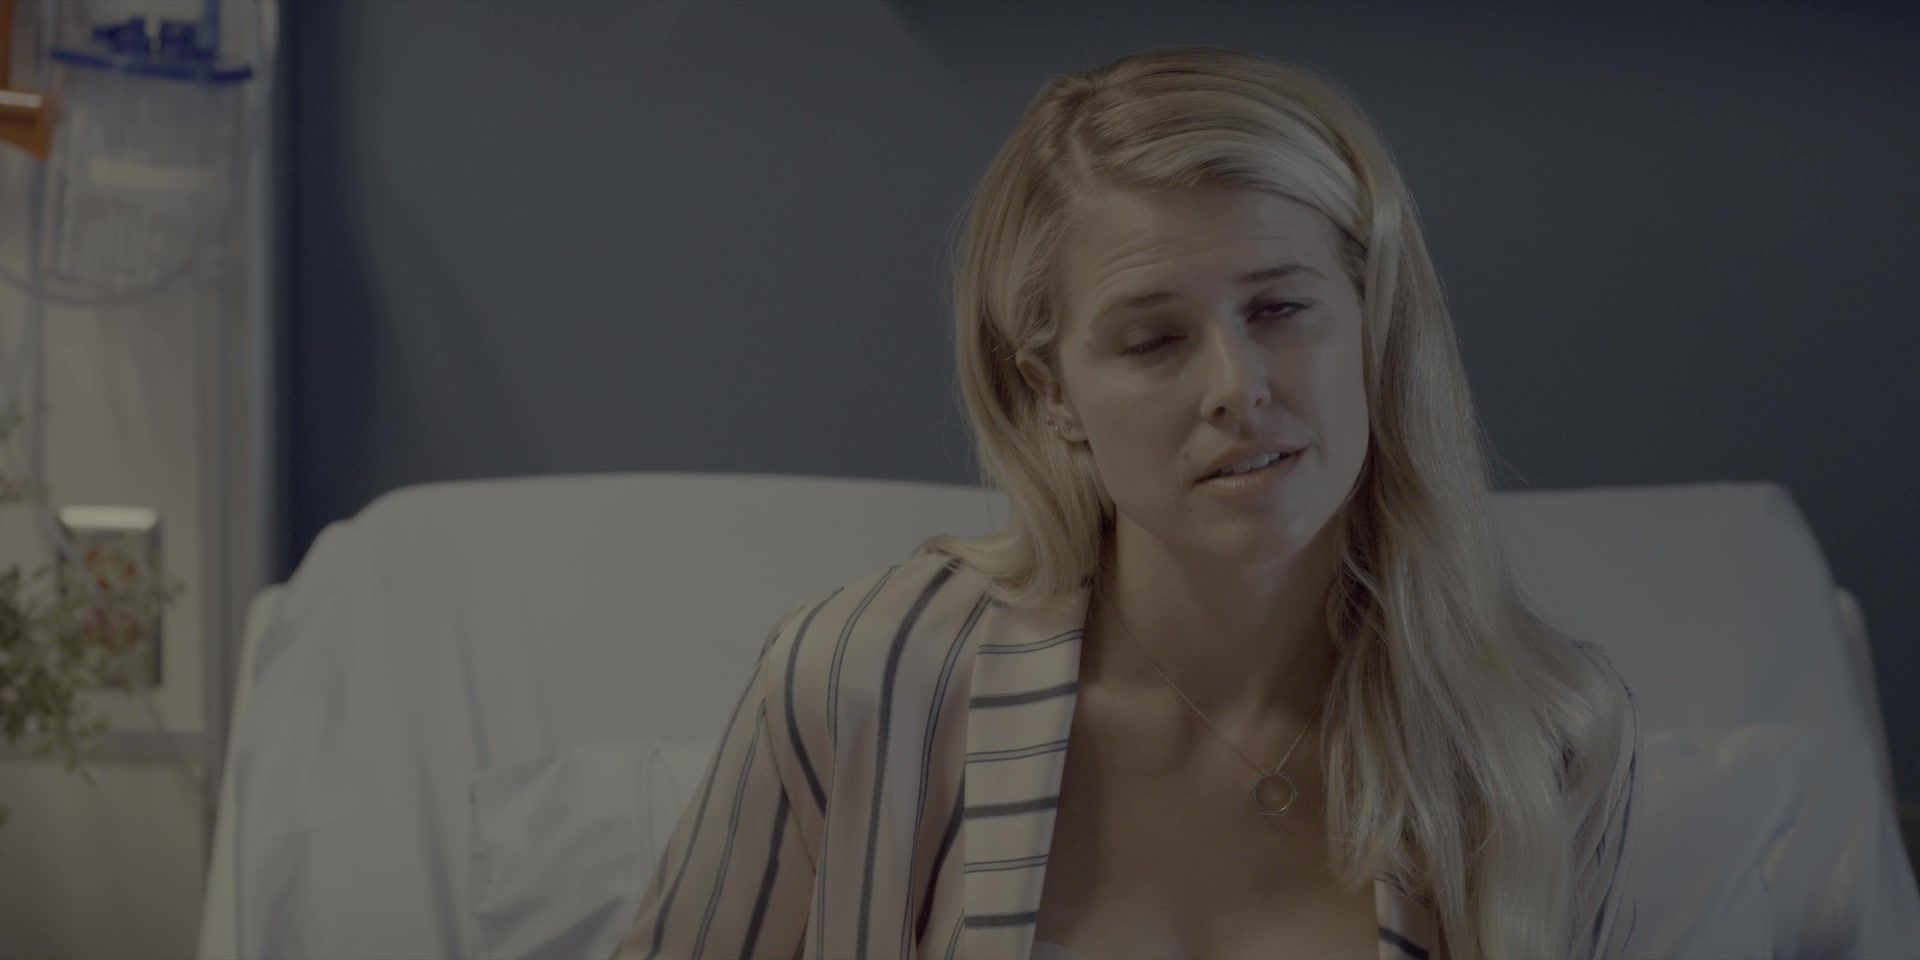 Assfucked Nude Willow Shields, Sarah Wright - Spinning Out s01e09-10 (2020) iYotTube